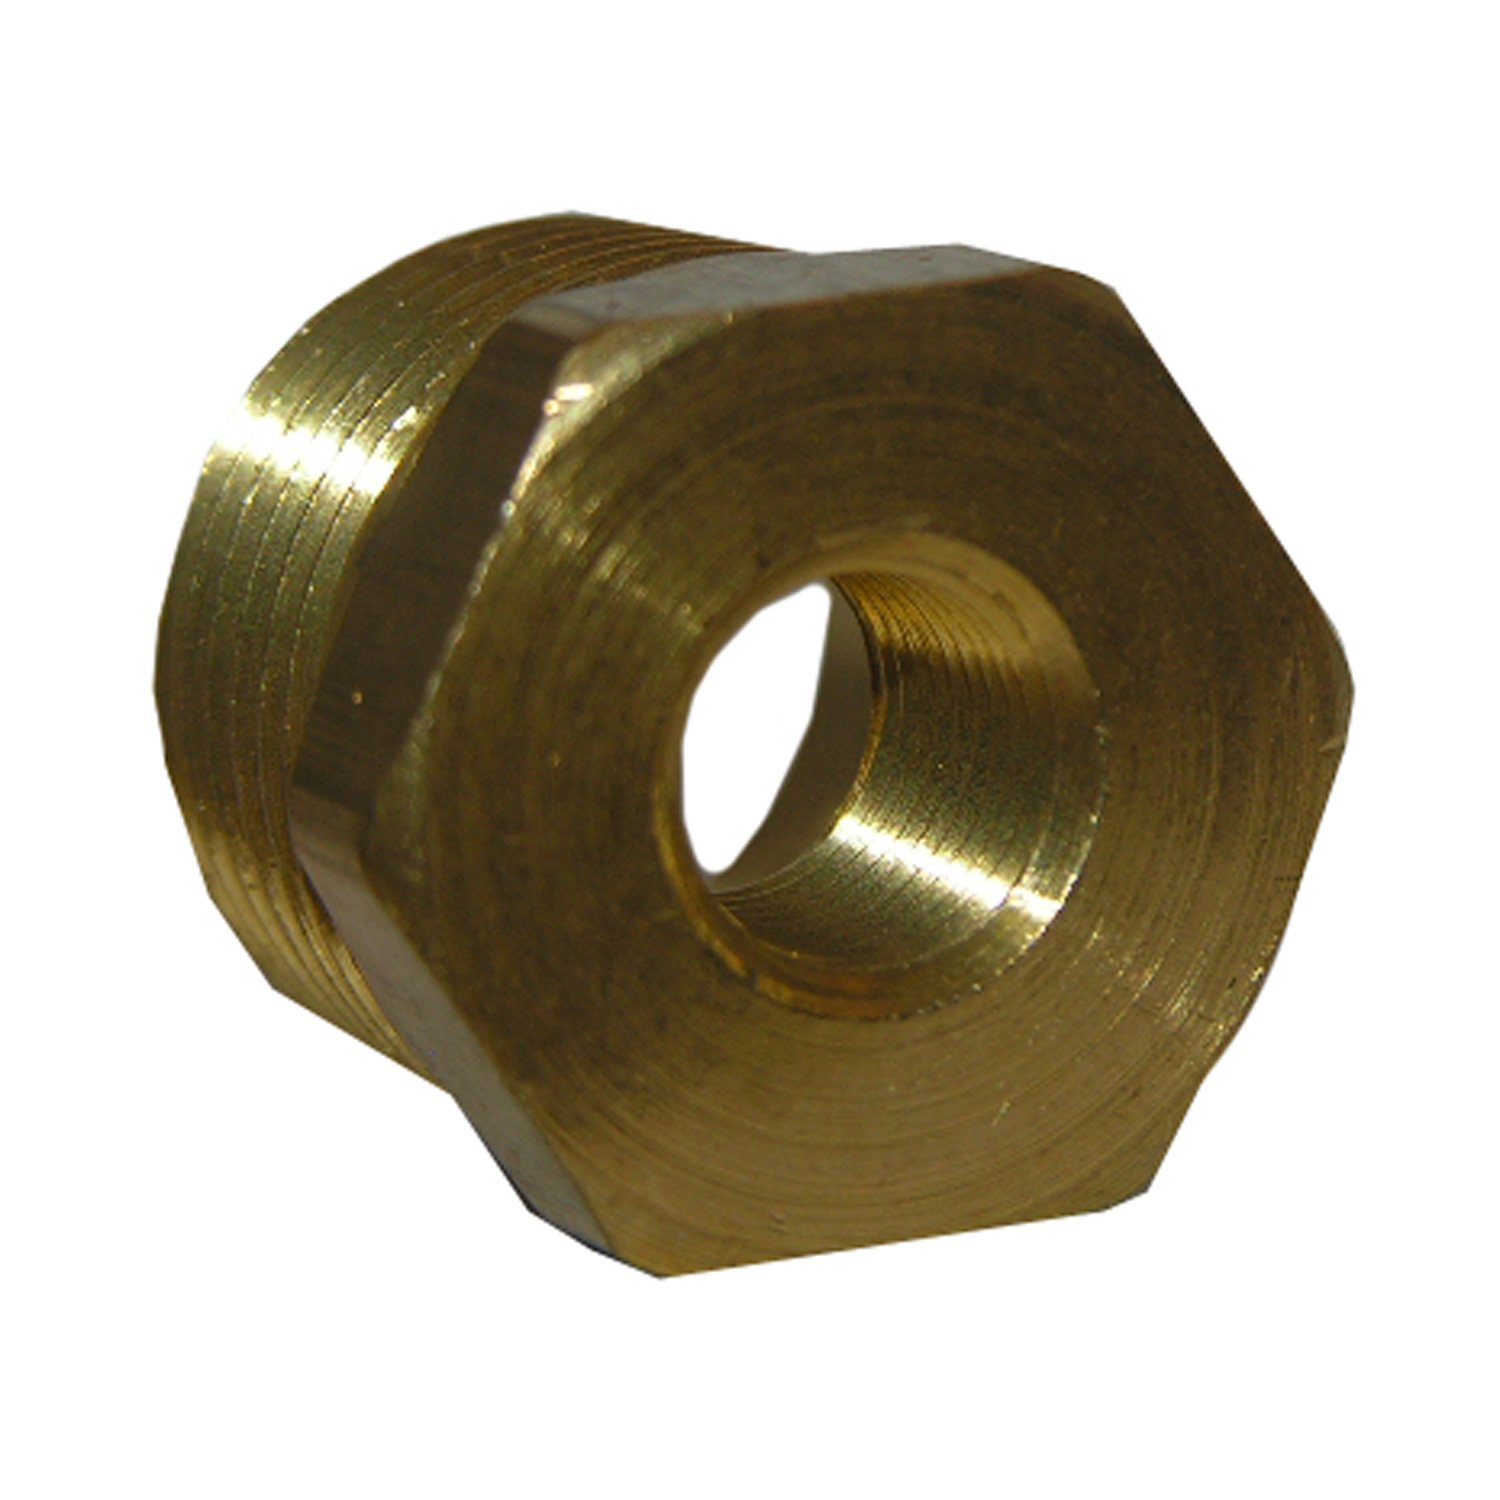 17-9245 Hex Pipe Bushing, 3/8 x 1/4 in, MPT x FPT, Brass, 125 psi Pressure